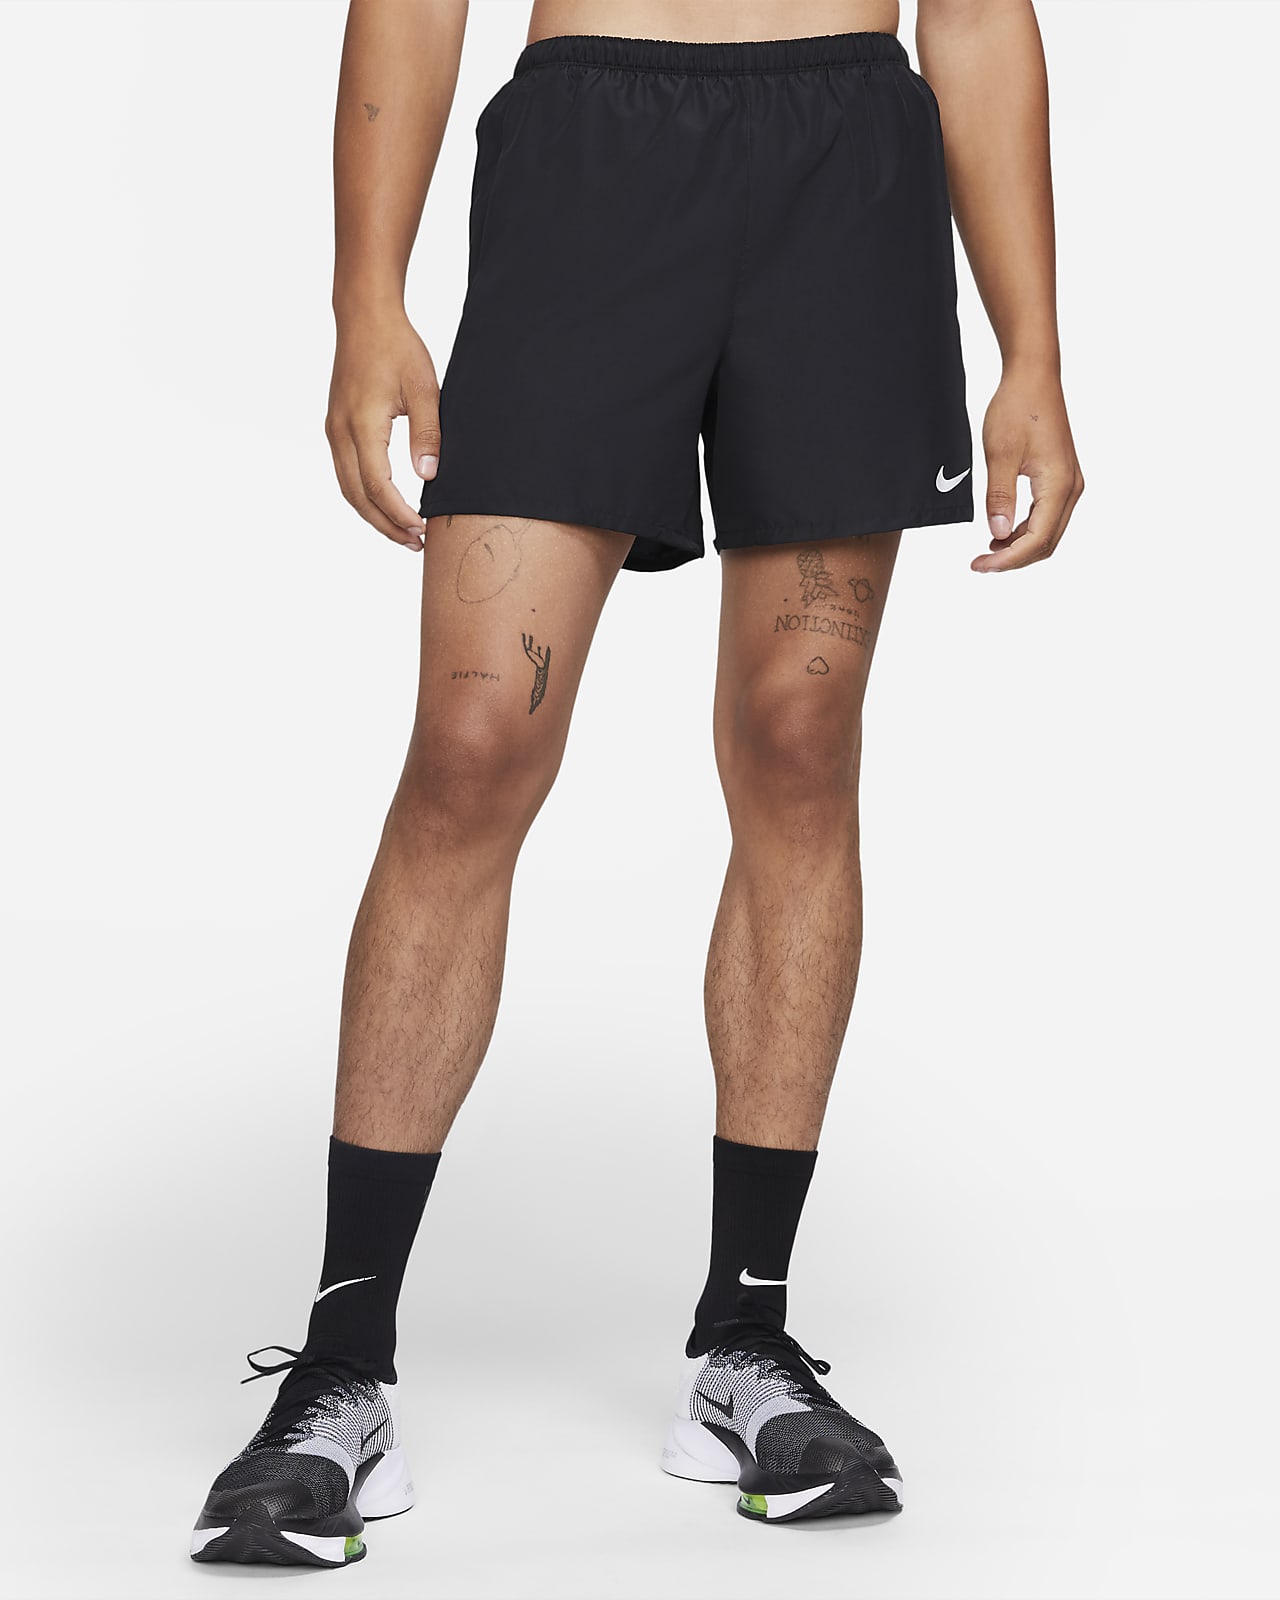 nike running shorts with boxer brief liner